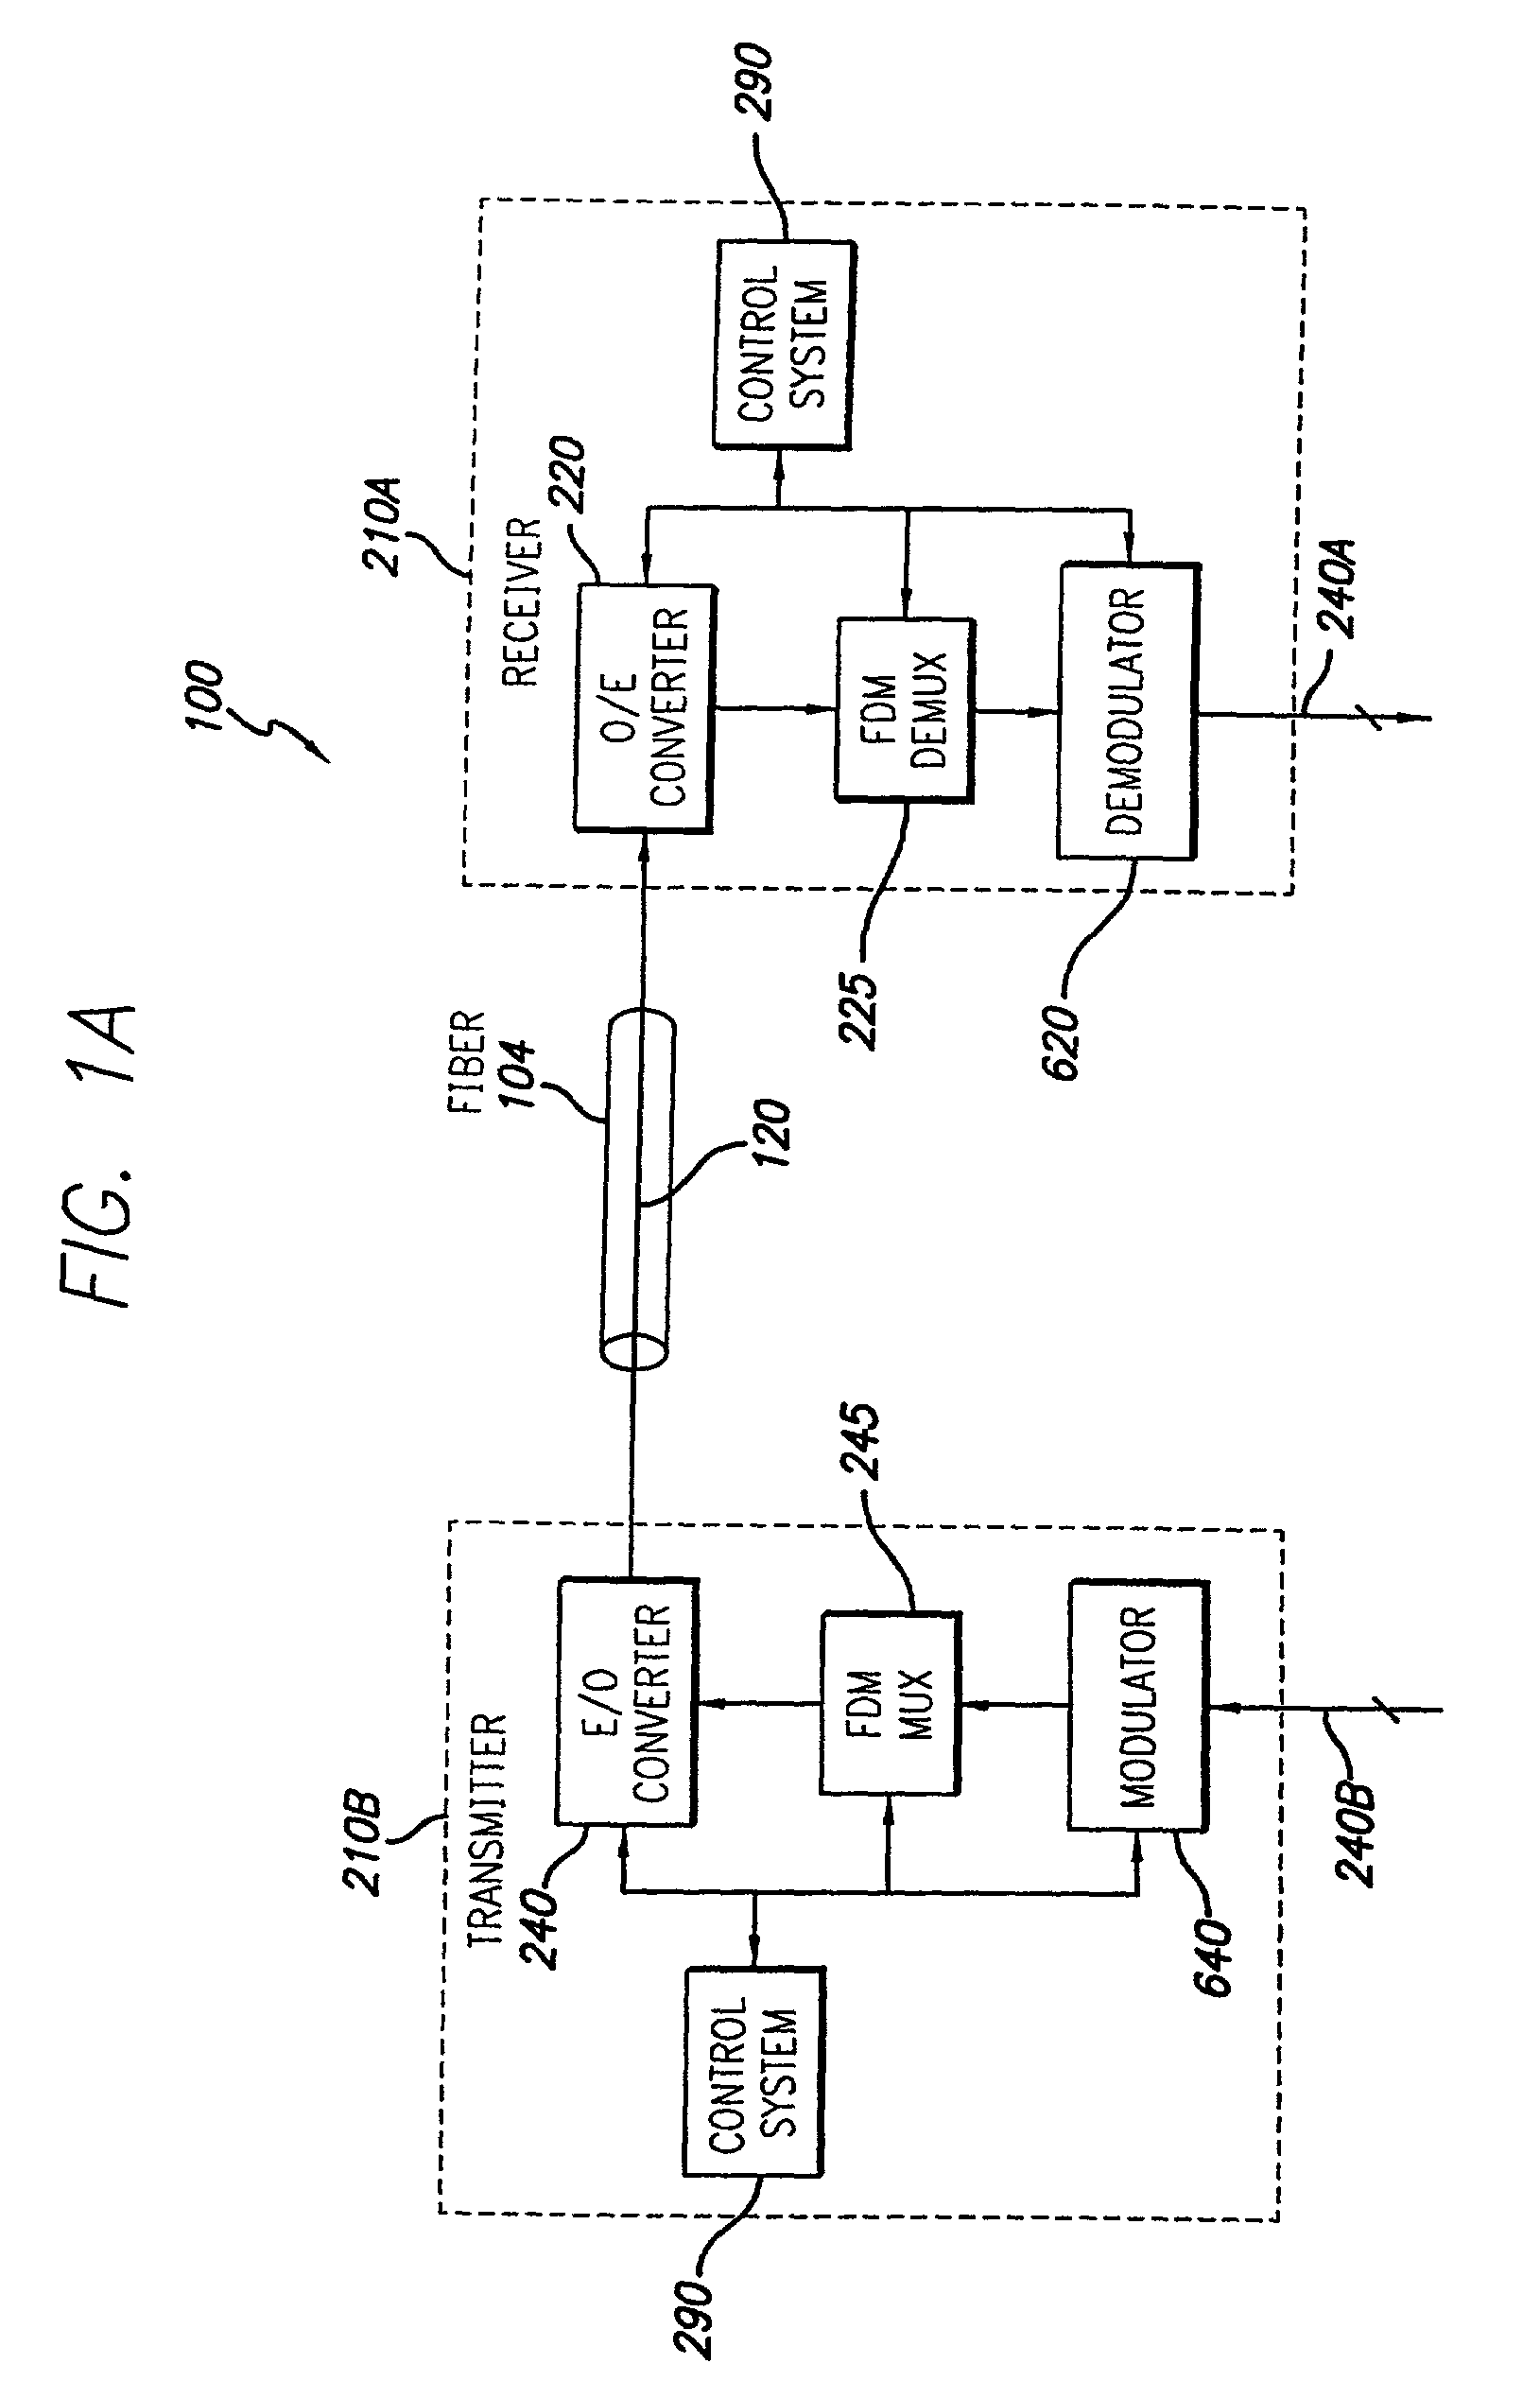 Through-timing of data transmitted across an optical communications system utilizing frequency division multiplexing